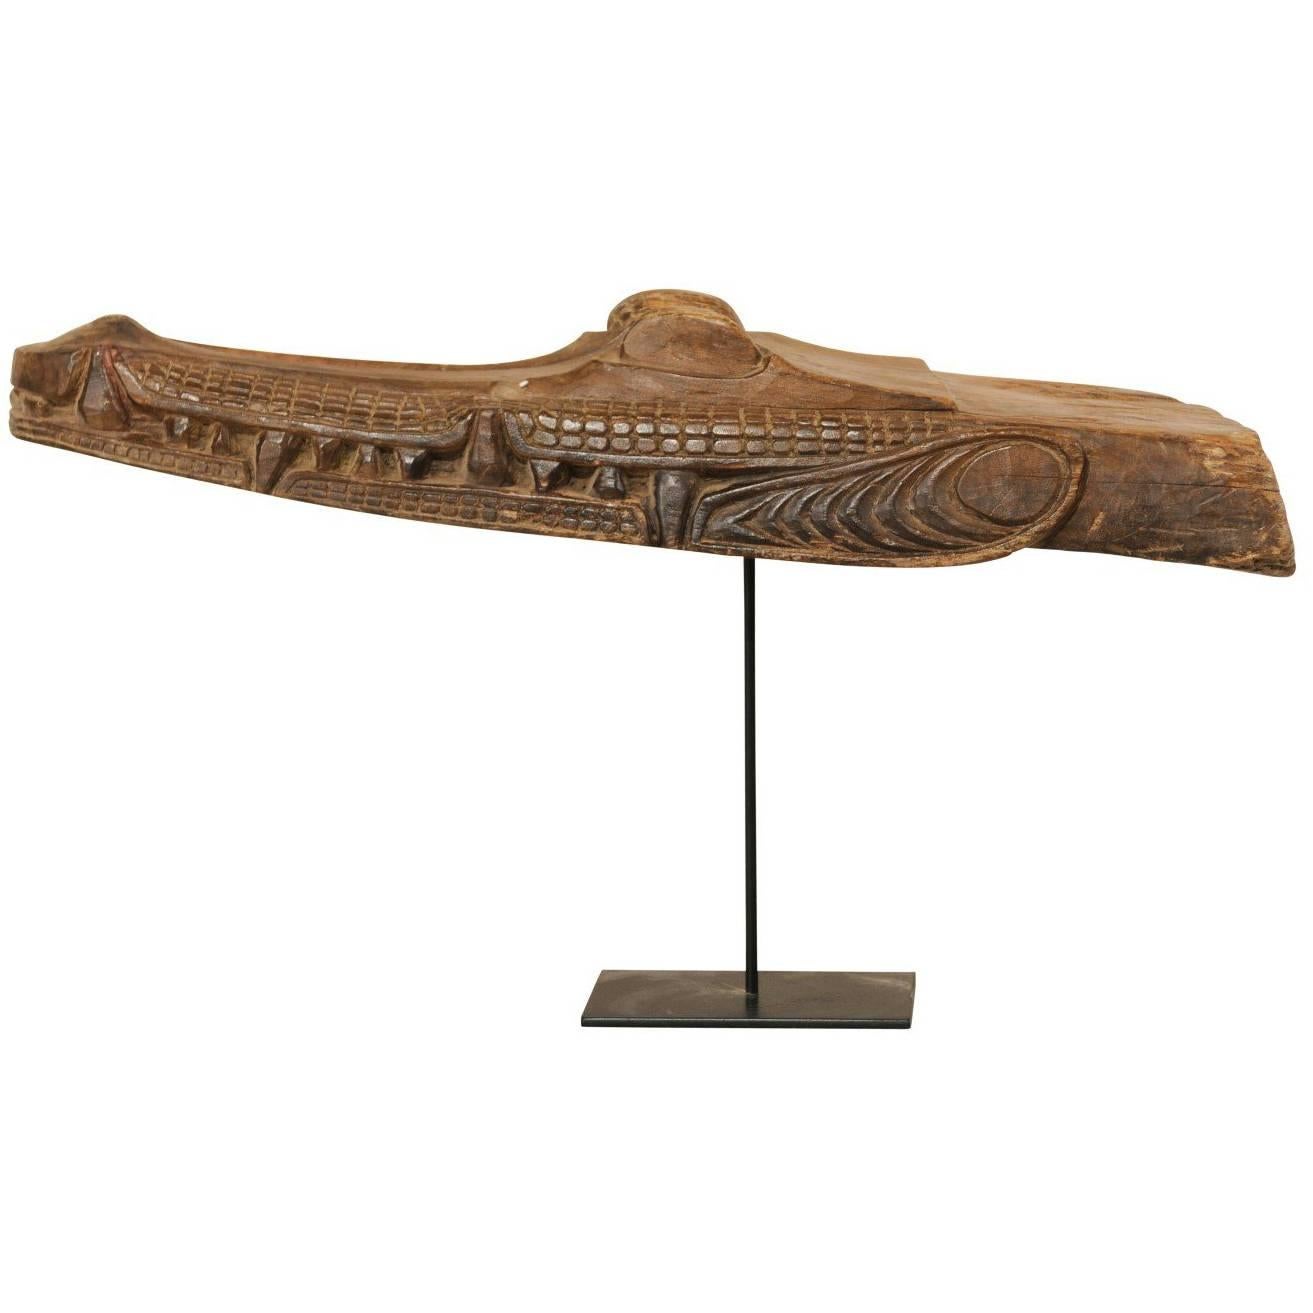 Hand Carved Crocodile Wood Boat Prow from a Papua New Guinea Village Canoe